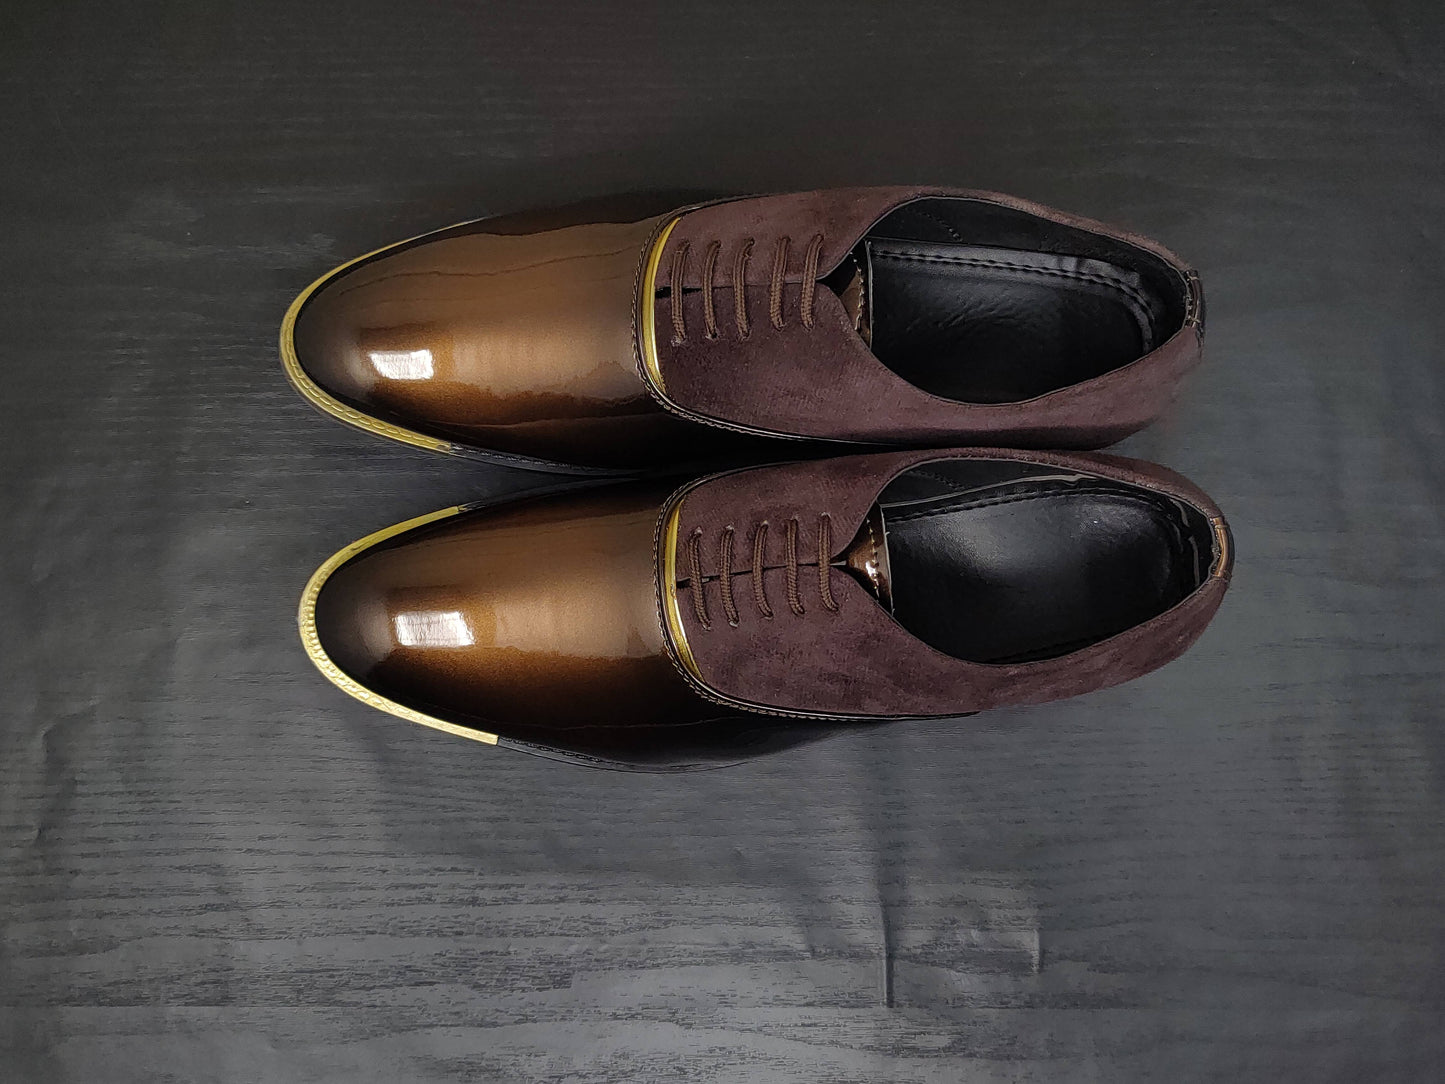 Men's Dark Brown Oxford Shoes for Wedding and Partywear-JonasParamount